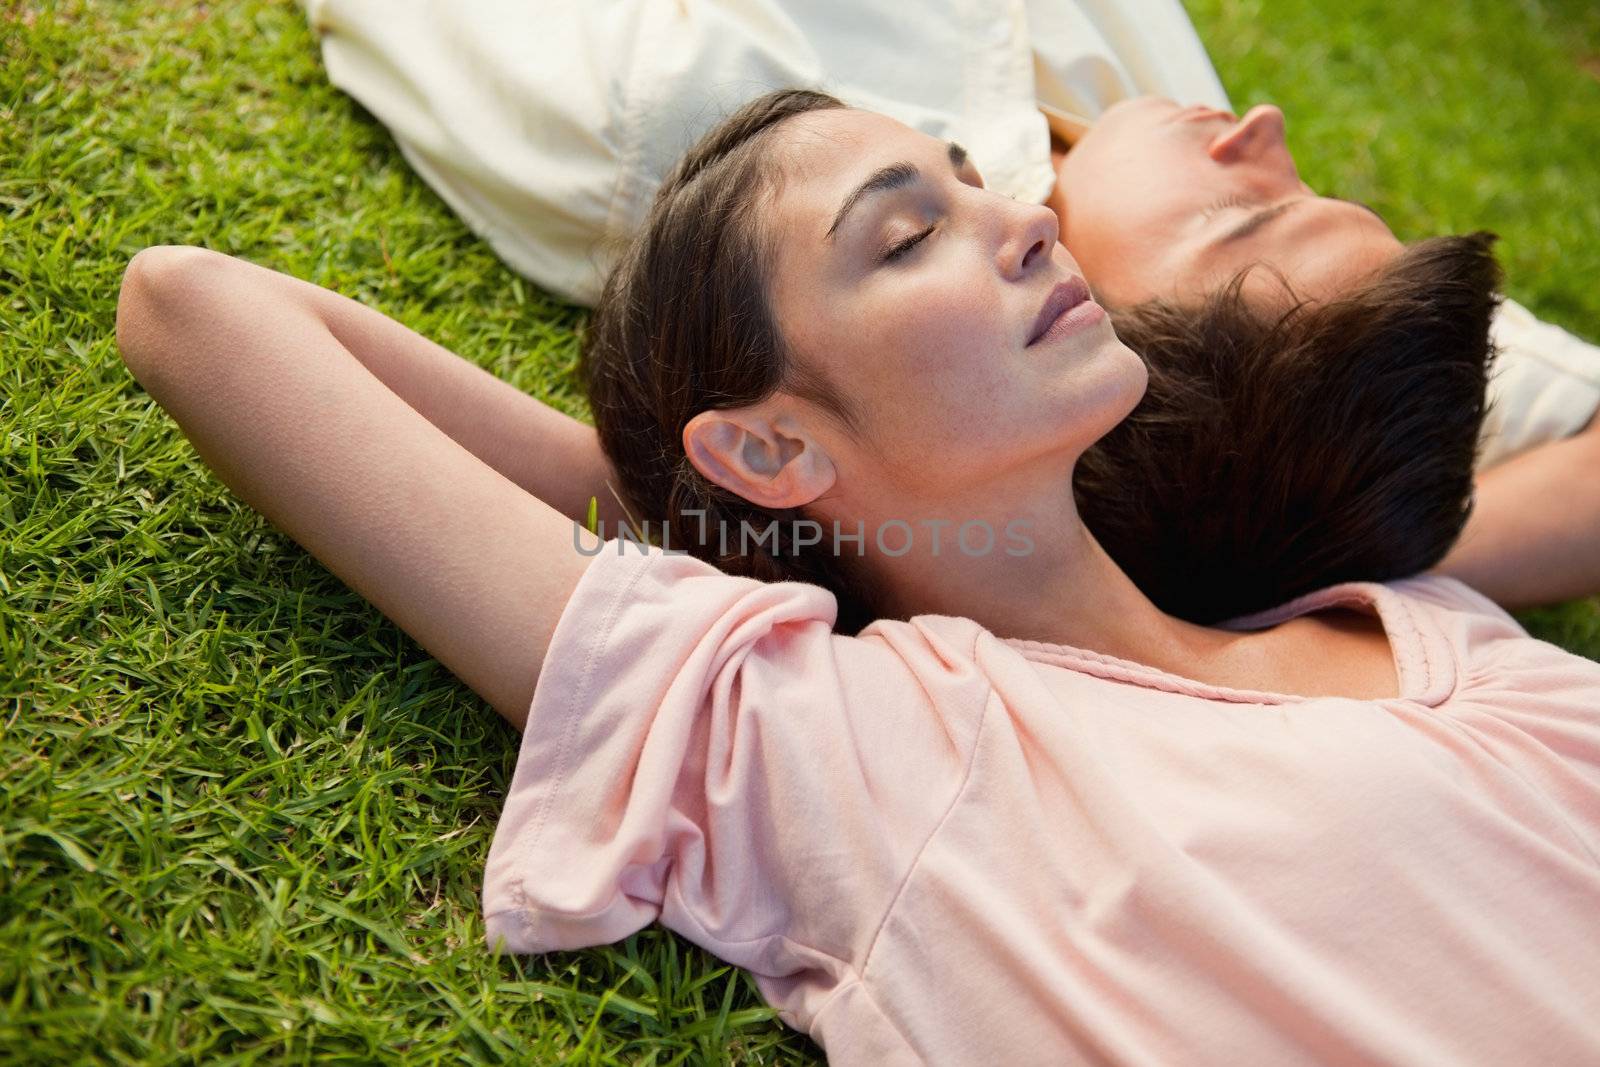 Woman and a man with their eyes closed lying head to shoulder with their arms resting behind their neck on the grass